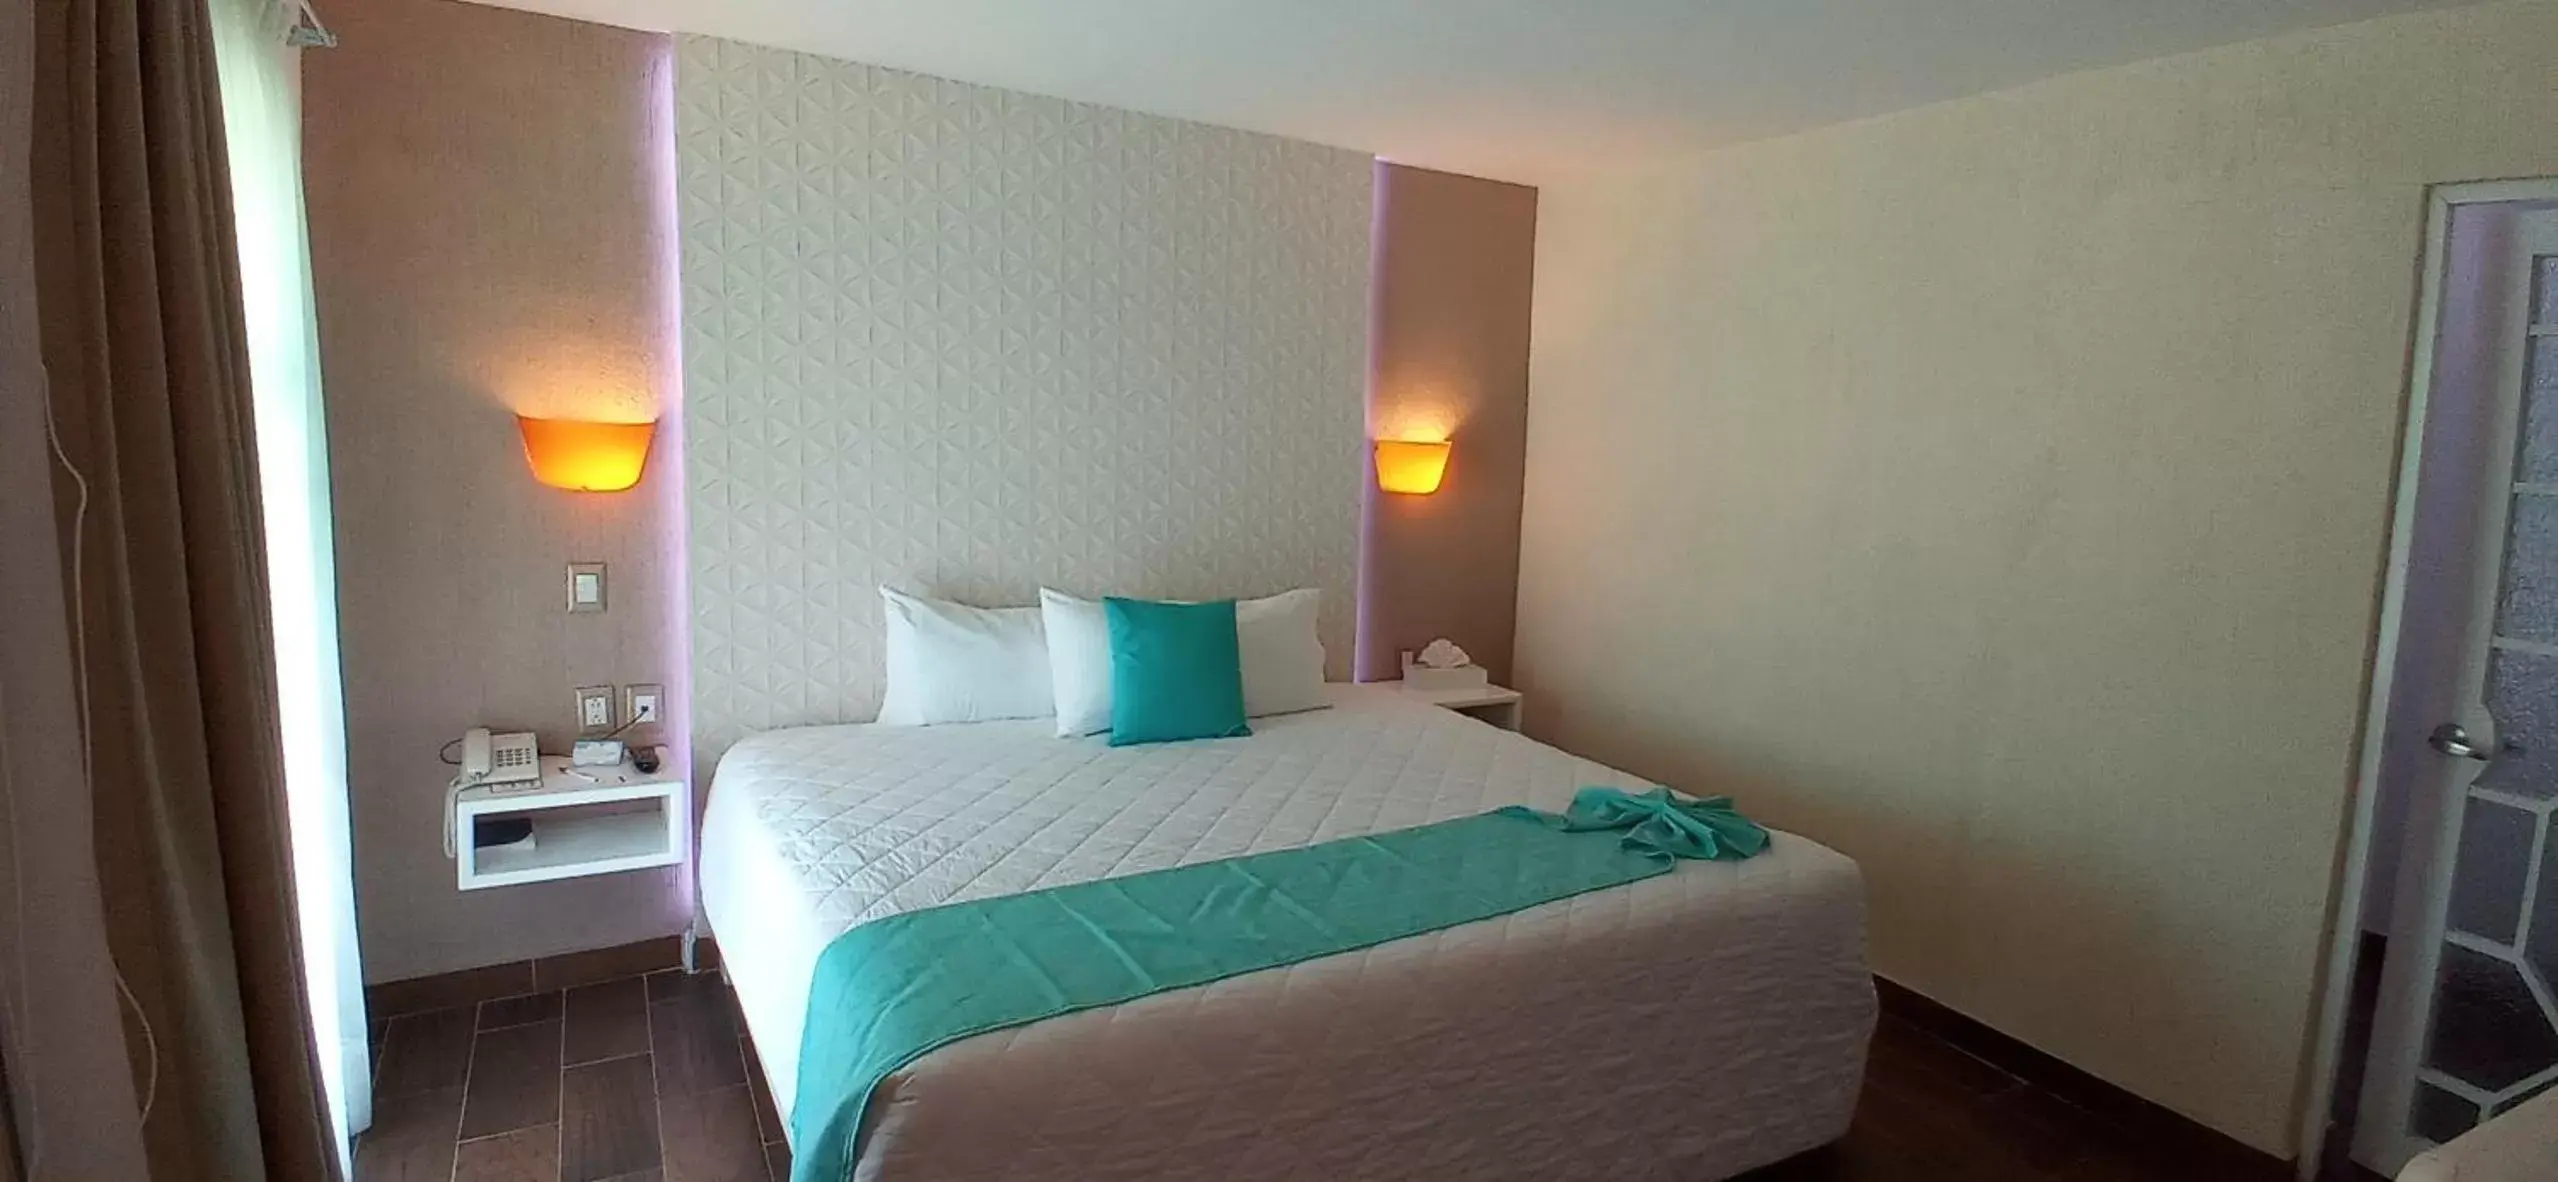 Executive Double Room in Hotel Medrano Temáticas and Business Rooms Aguascalientes